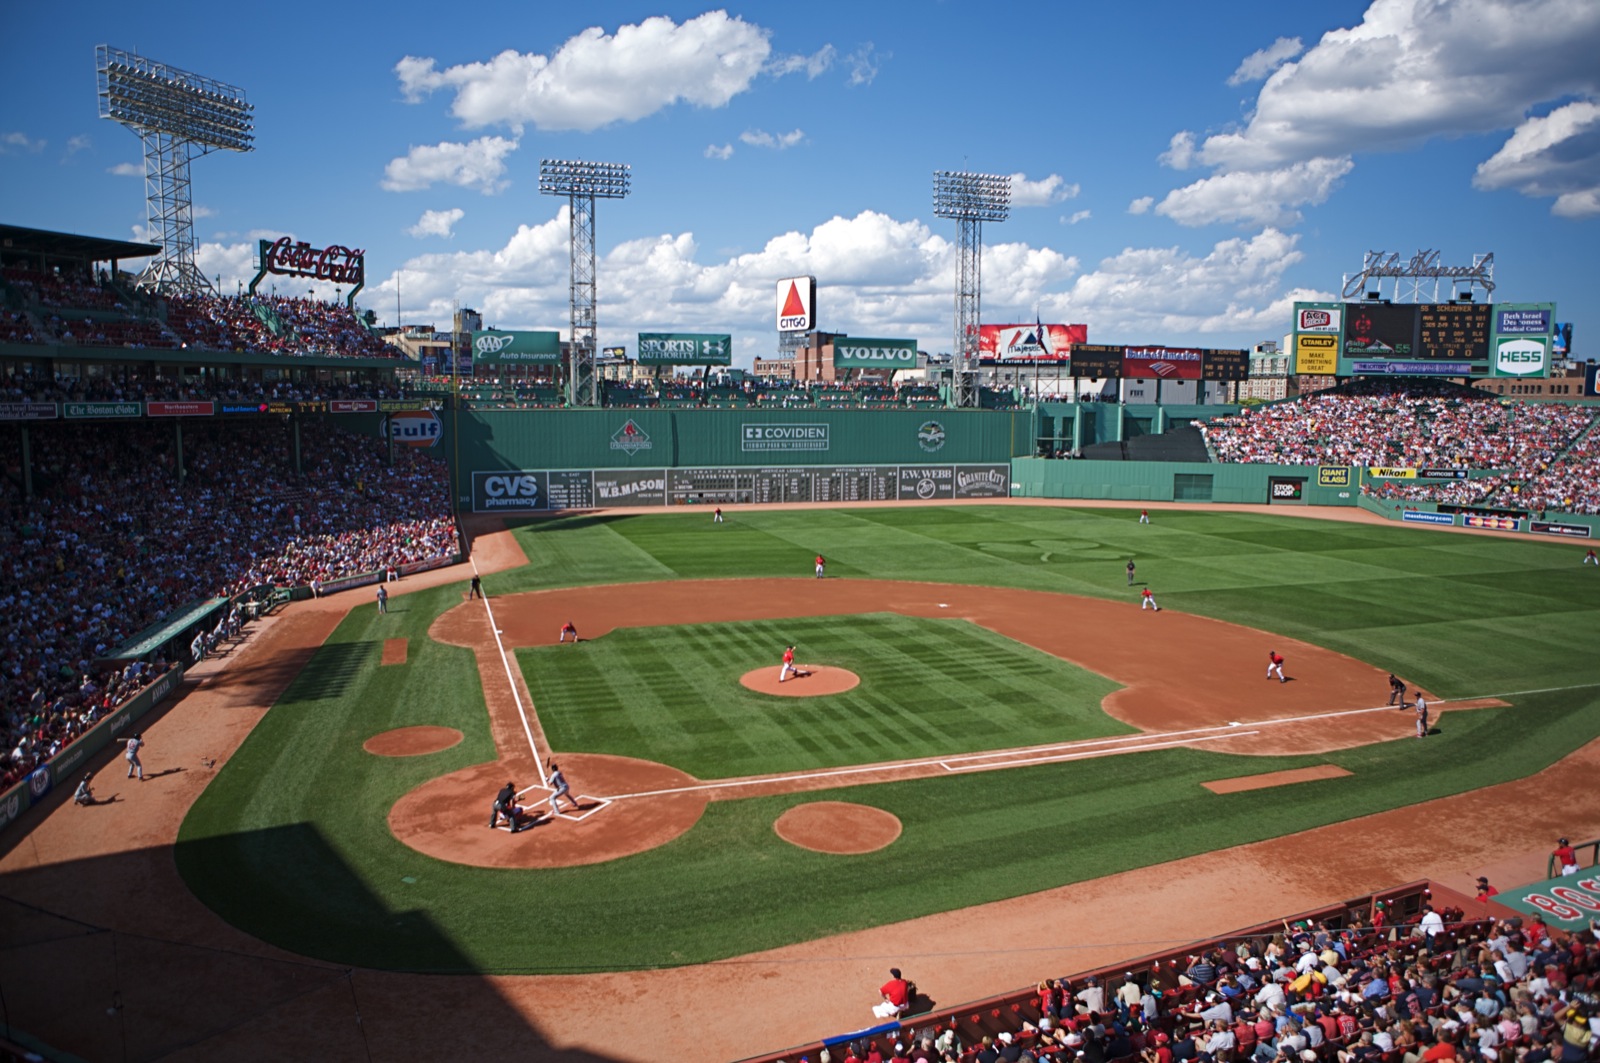 What's behind the green monster at Fenway park? 